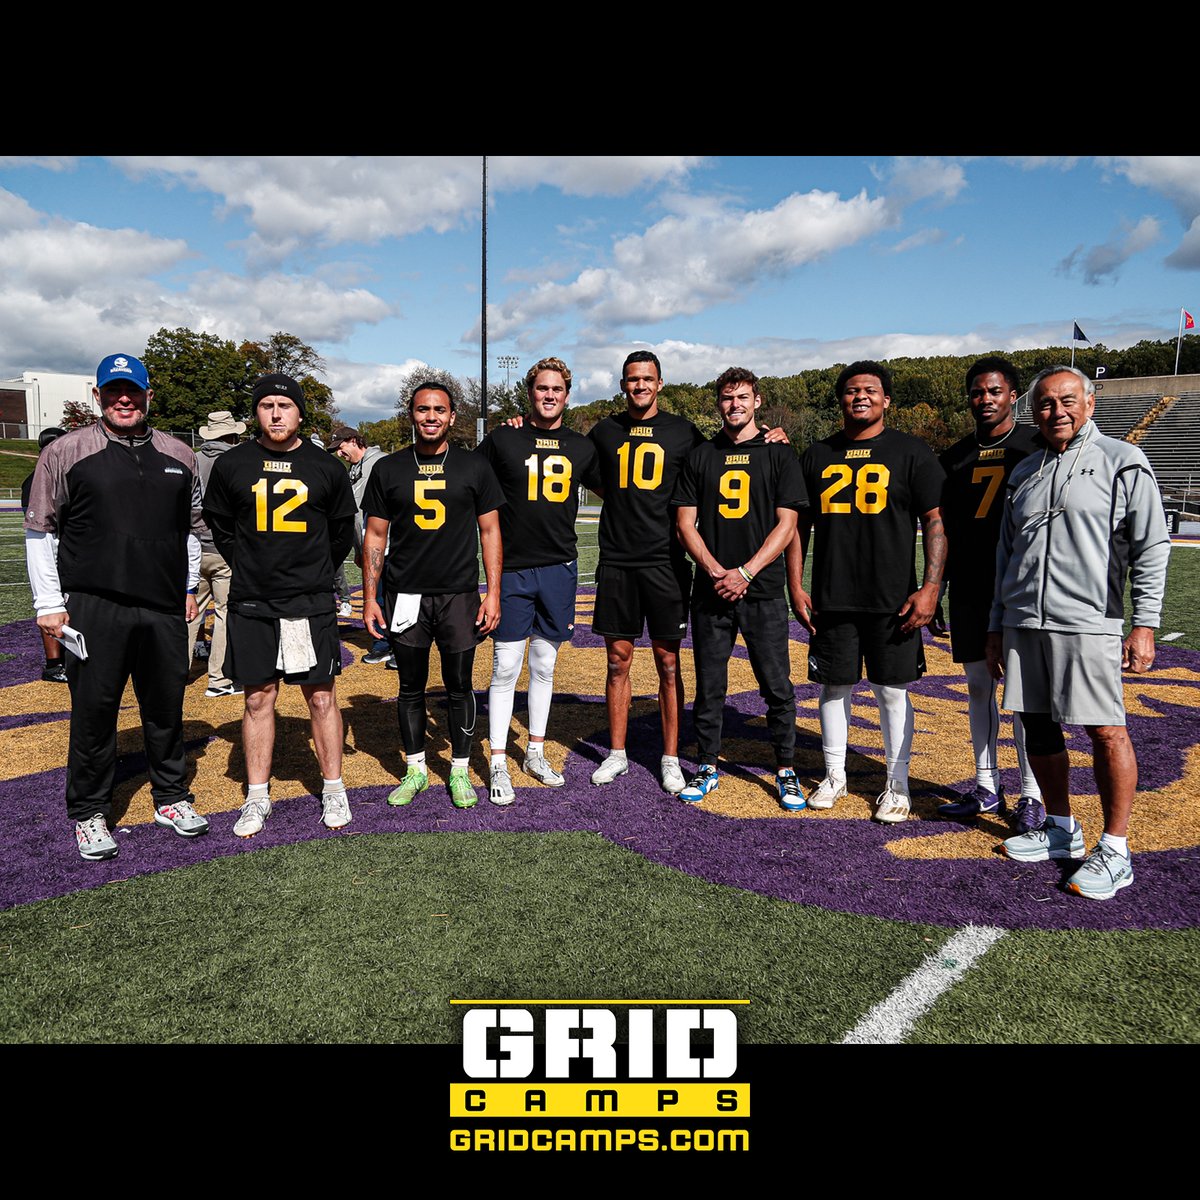 🔥🏈GRID QBs get mentored by some of the best! @UFLCoachFlip and Norm Chow had this talented group in a recent #GRIDCamps! NEXT WORKOUT: Sunday, May 19 in San Diego, CA! 🌴 #whoisnext? Submit your profile at gridcamps.com! 🎯 @NFL @CFL @TheUFL @NRL @TheIFAFootball…